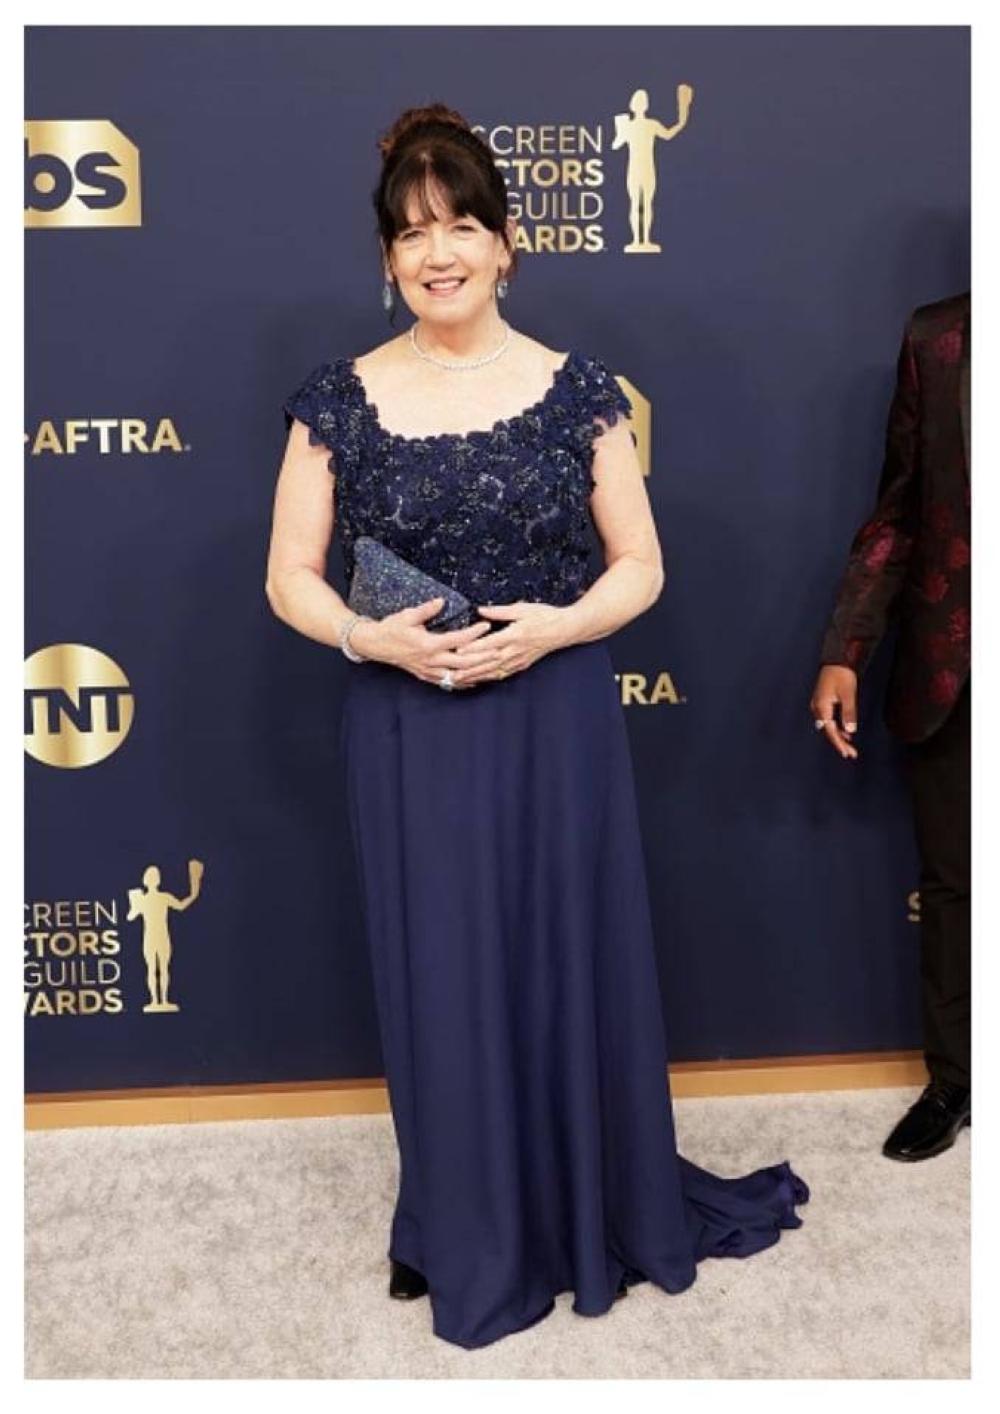 Ann Dowd wearing Oliver Tolentino at the SAG Awards. PHOTO COURTESY TO STHANLEE MIRADOR